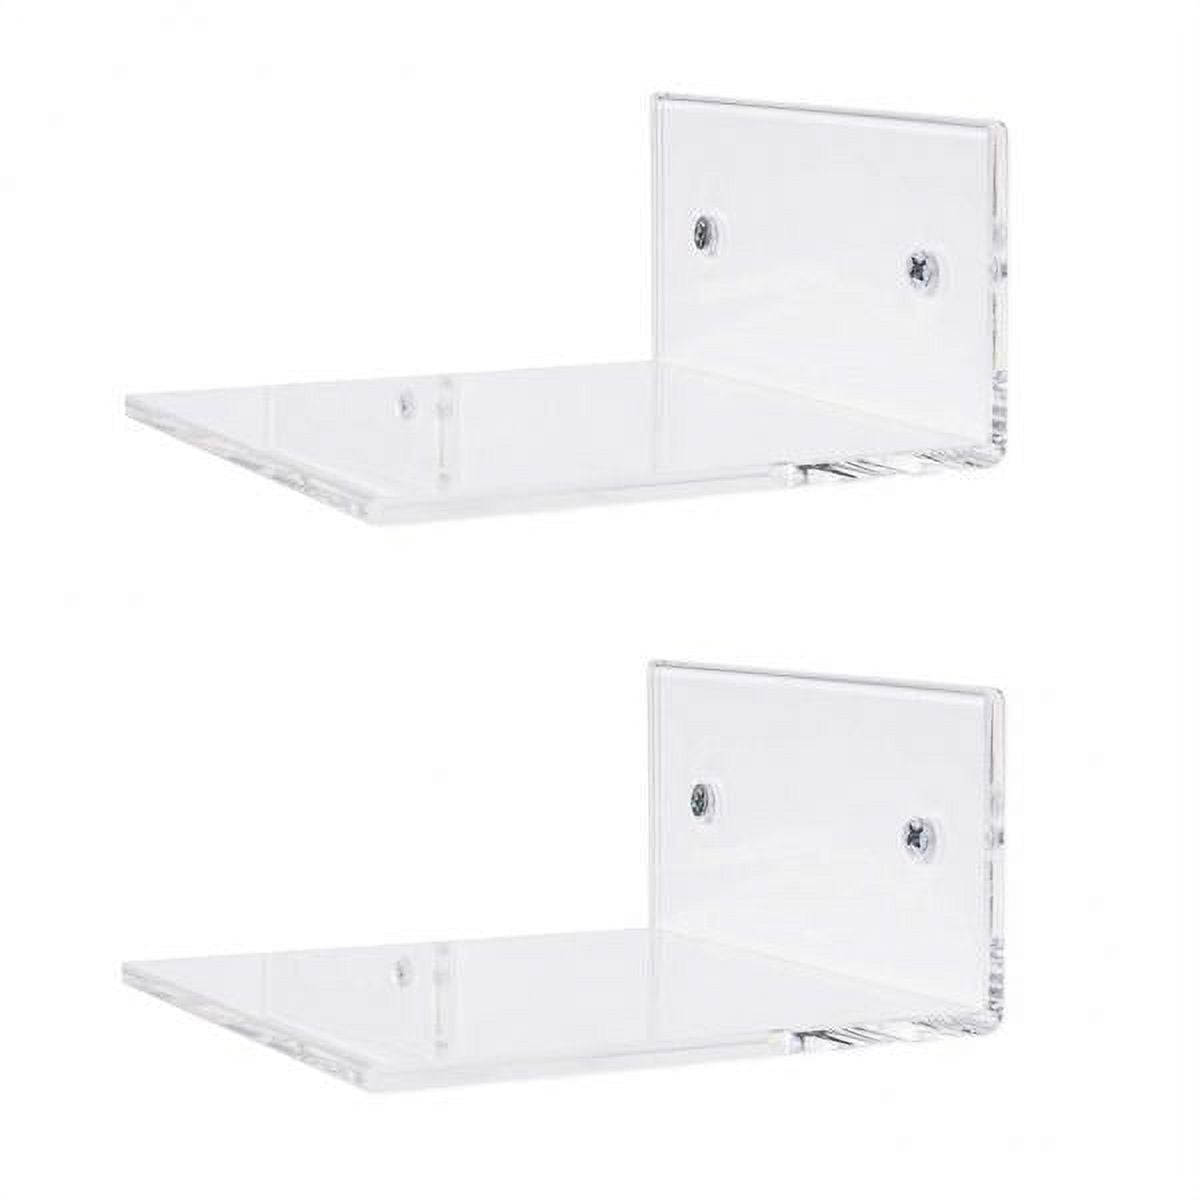 VILSECKY Stick-on Wall Shelf - Small Wall Mounted Adhesive Clear Acrylic  Shelf Phone Holder Shelves Wipes Rack for Bathroom,Kitchen,Toilet,Office 